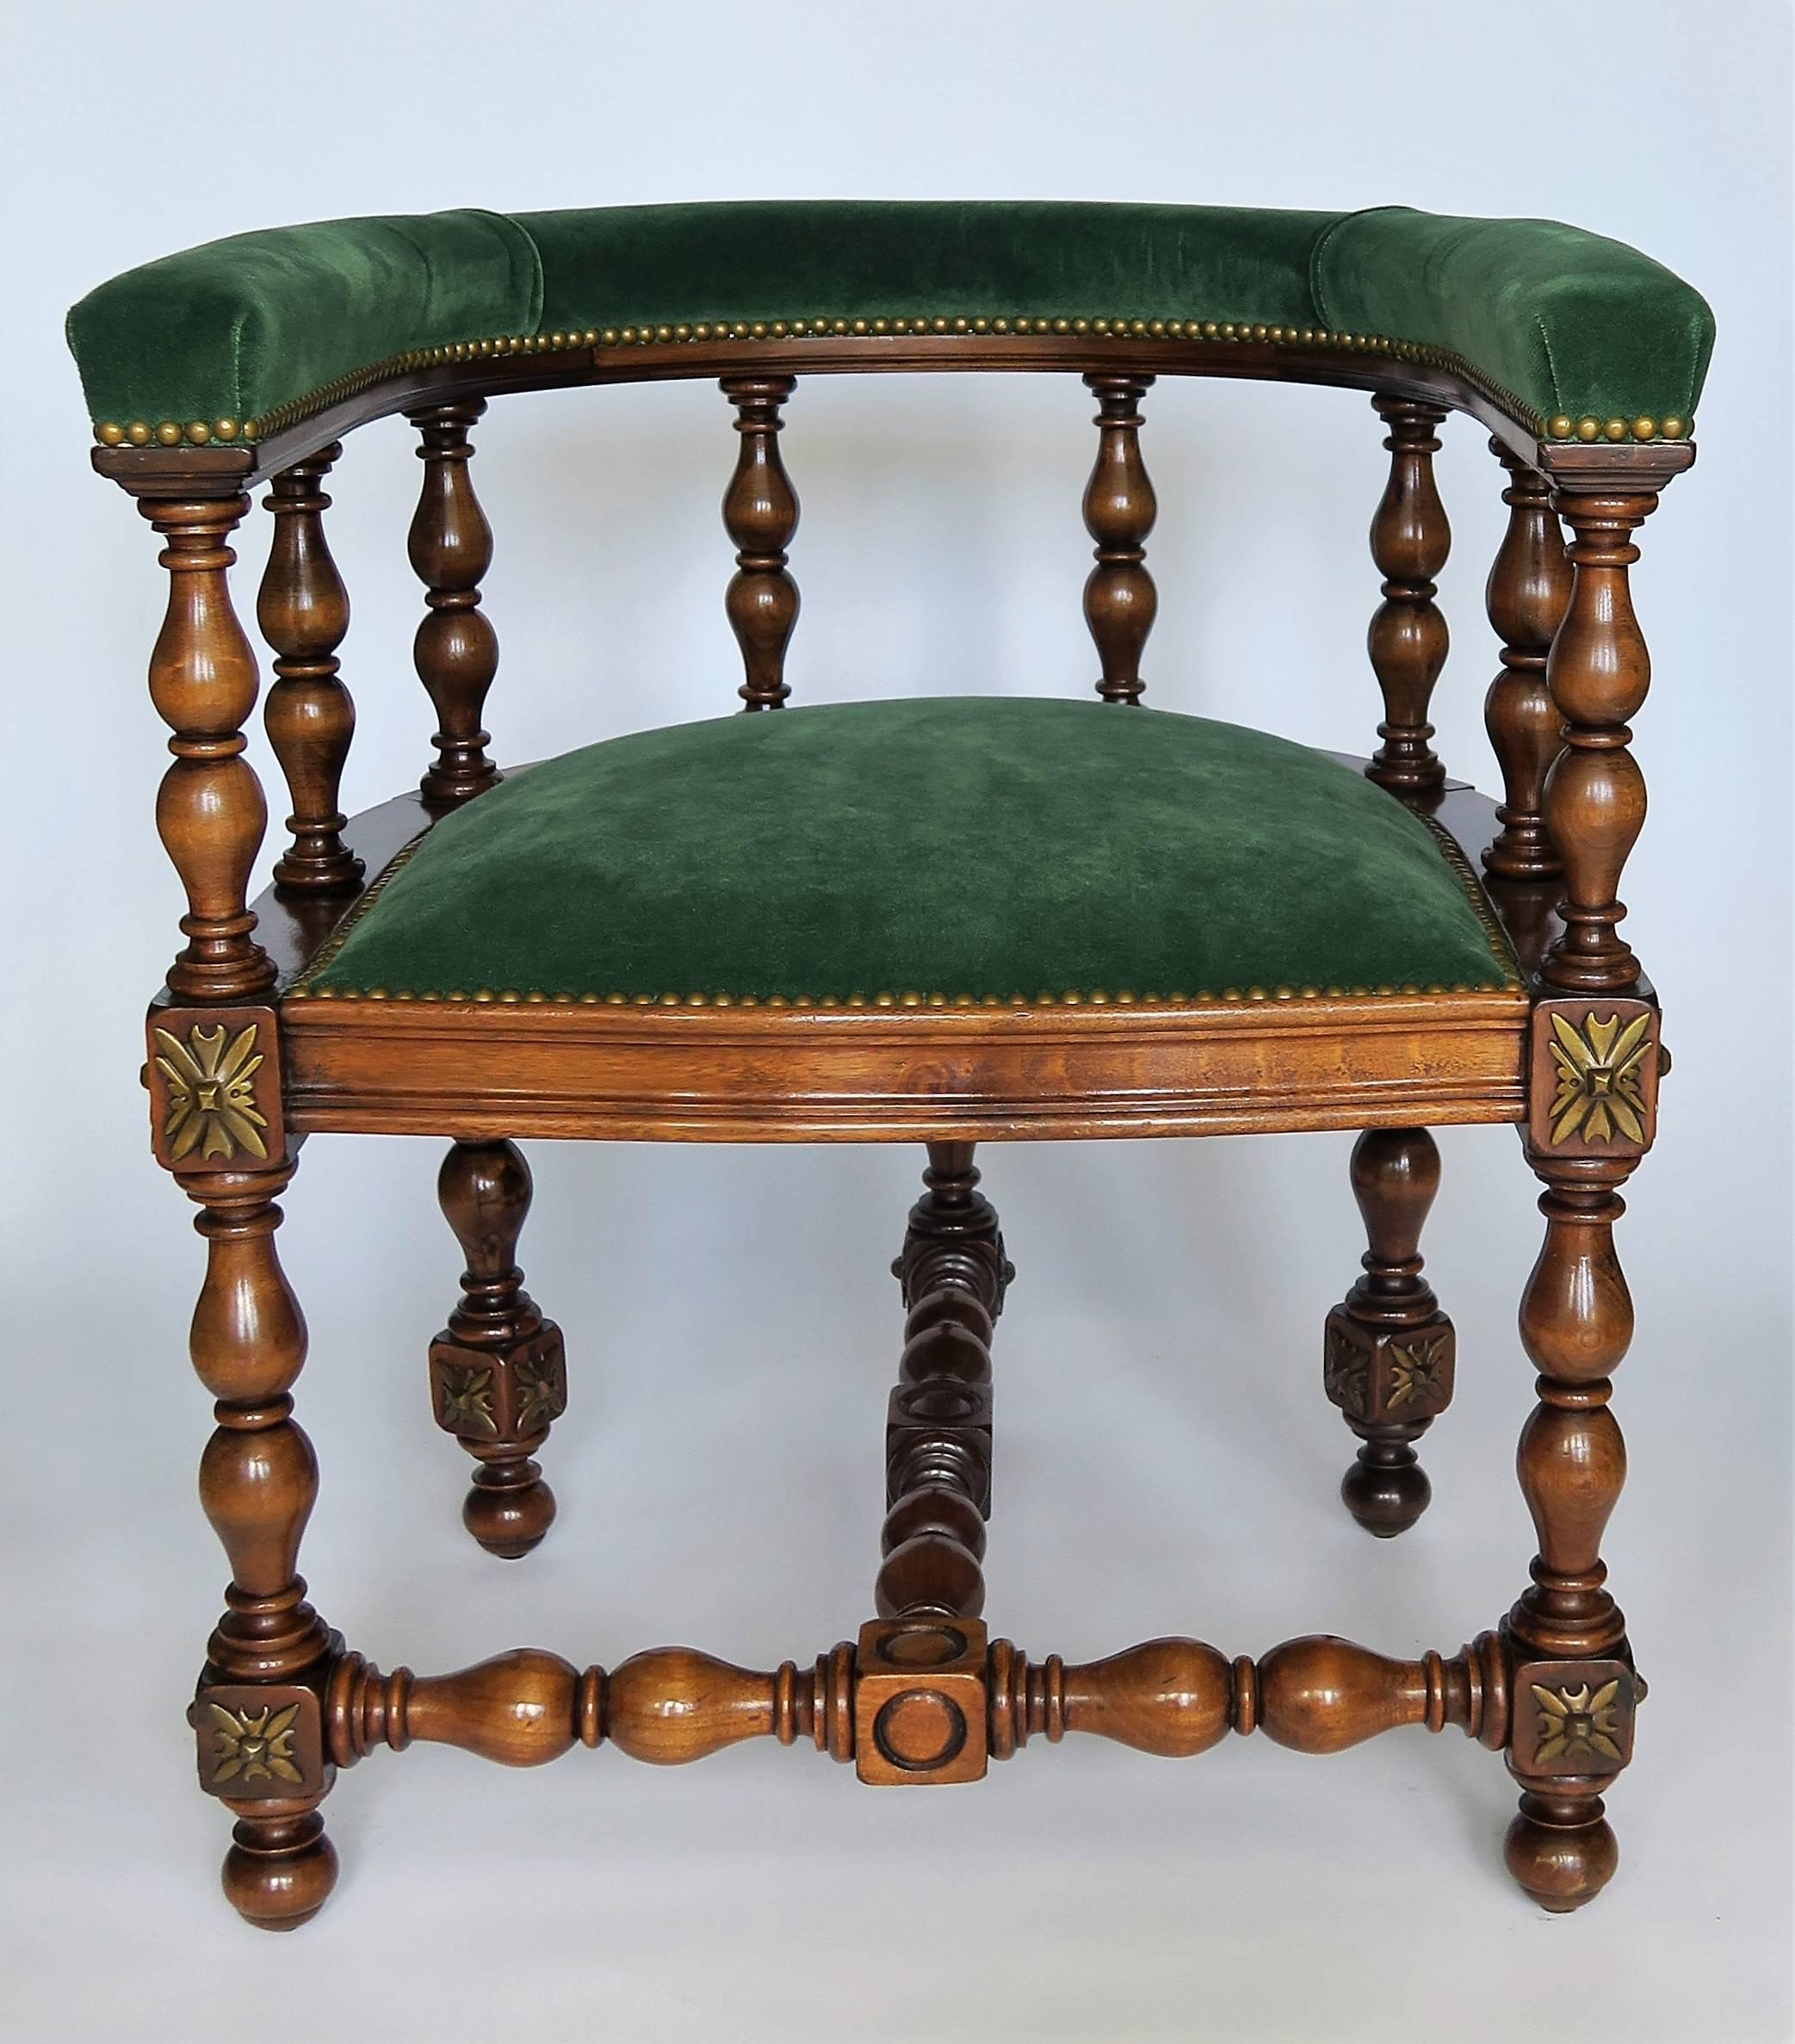 Decadent and refined, this pair of elegant barrel back Jacobean styled armchairs or library chairs have detailed hand-turned legs and back. The oakwood is rich with gorgeous patina, brass escutcheons medallions on each leg corner complete the look.